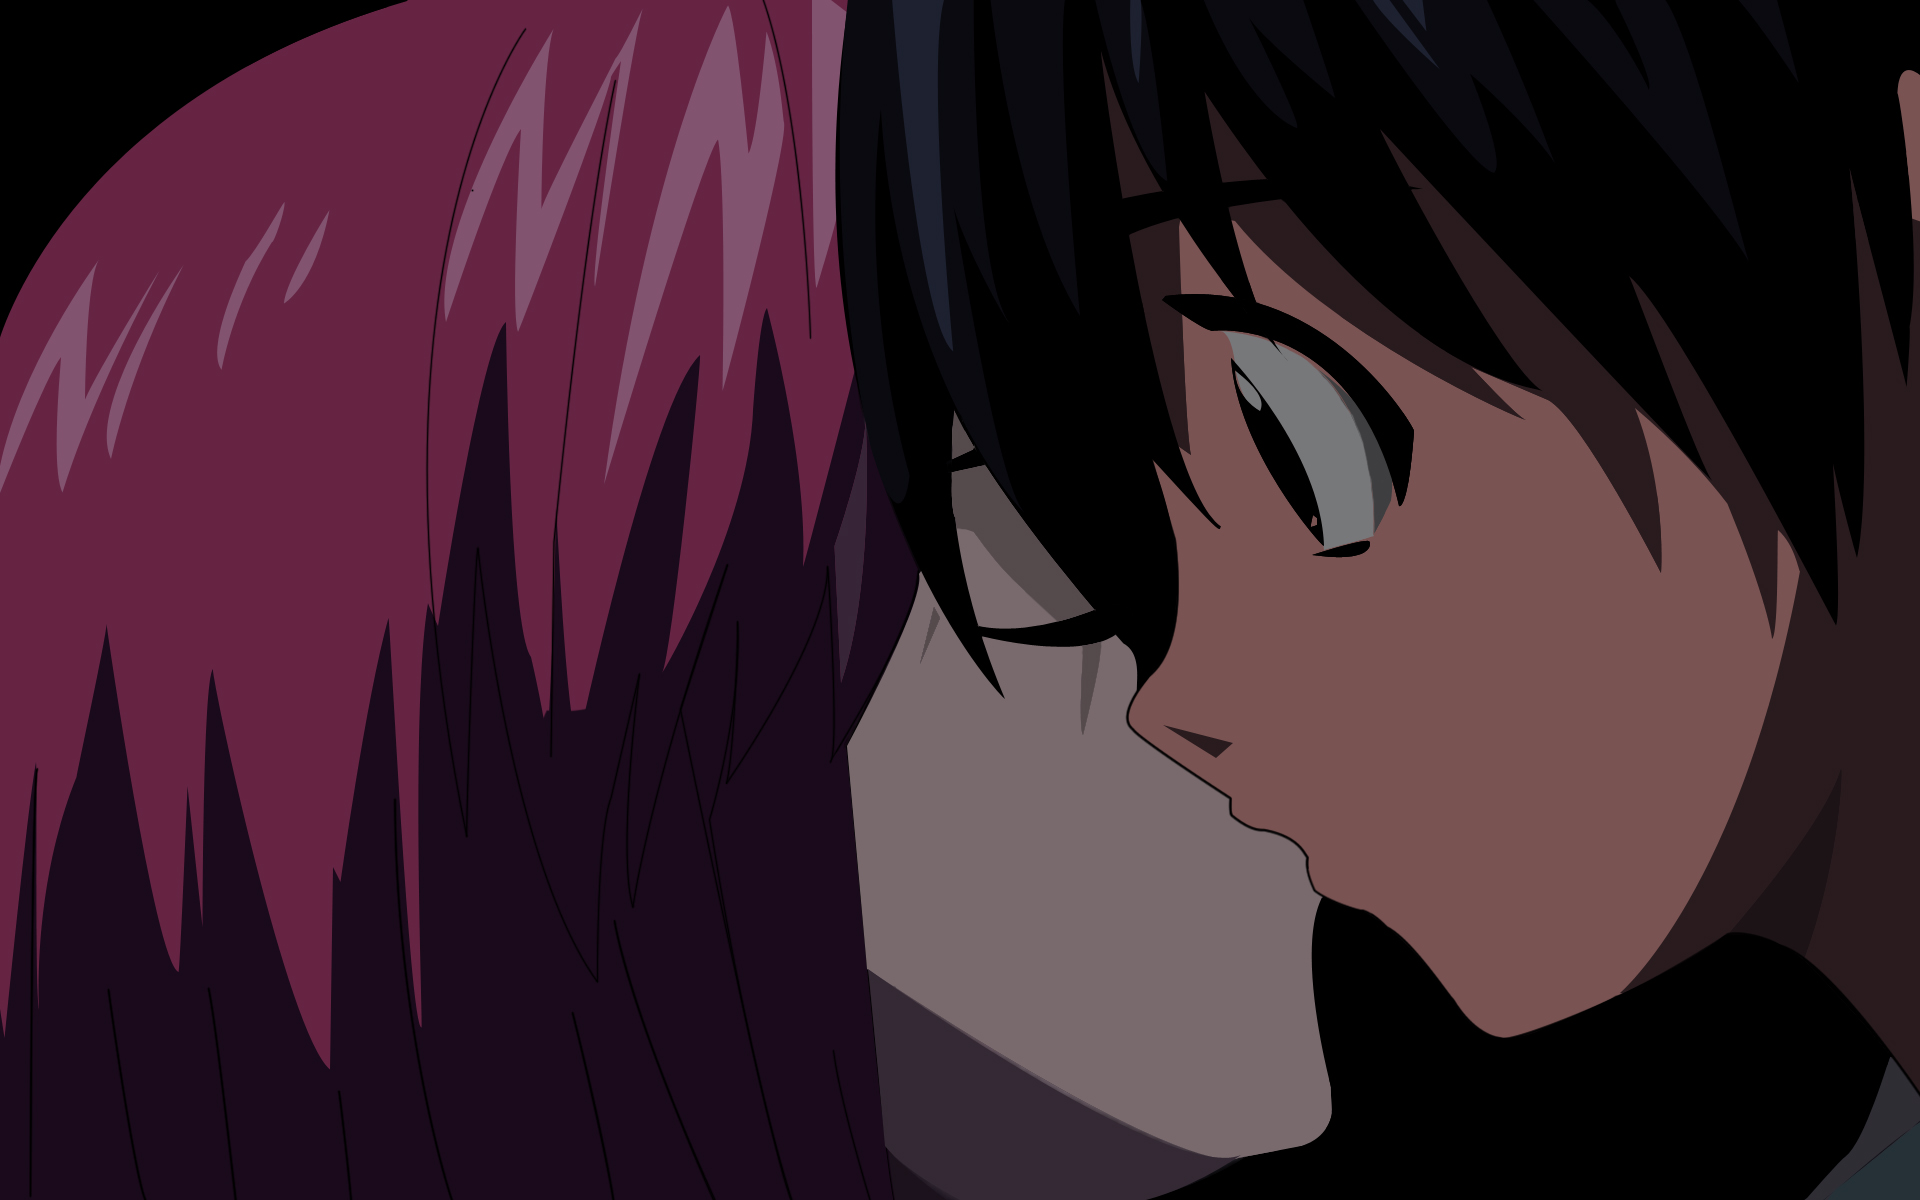 Lucy and Kouta from the anime Elfen Lied in a captivating desktop wallpaper